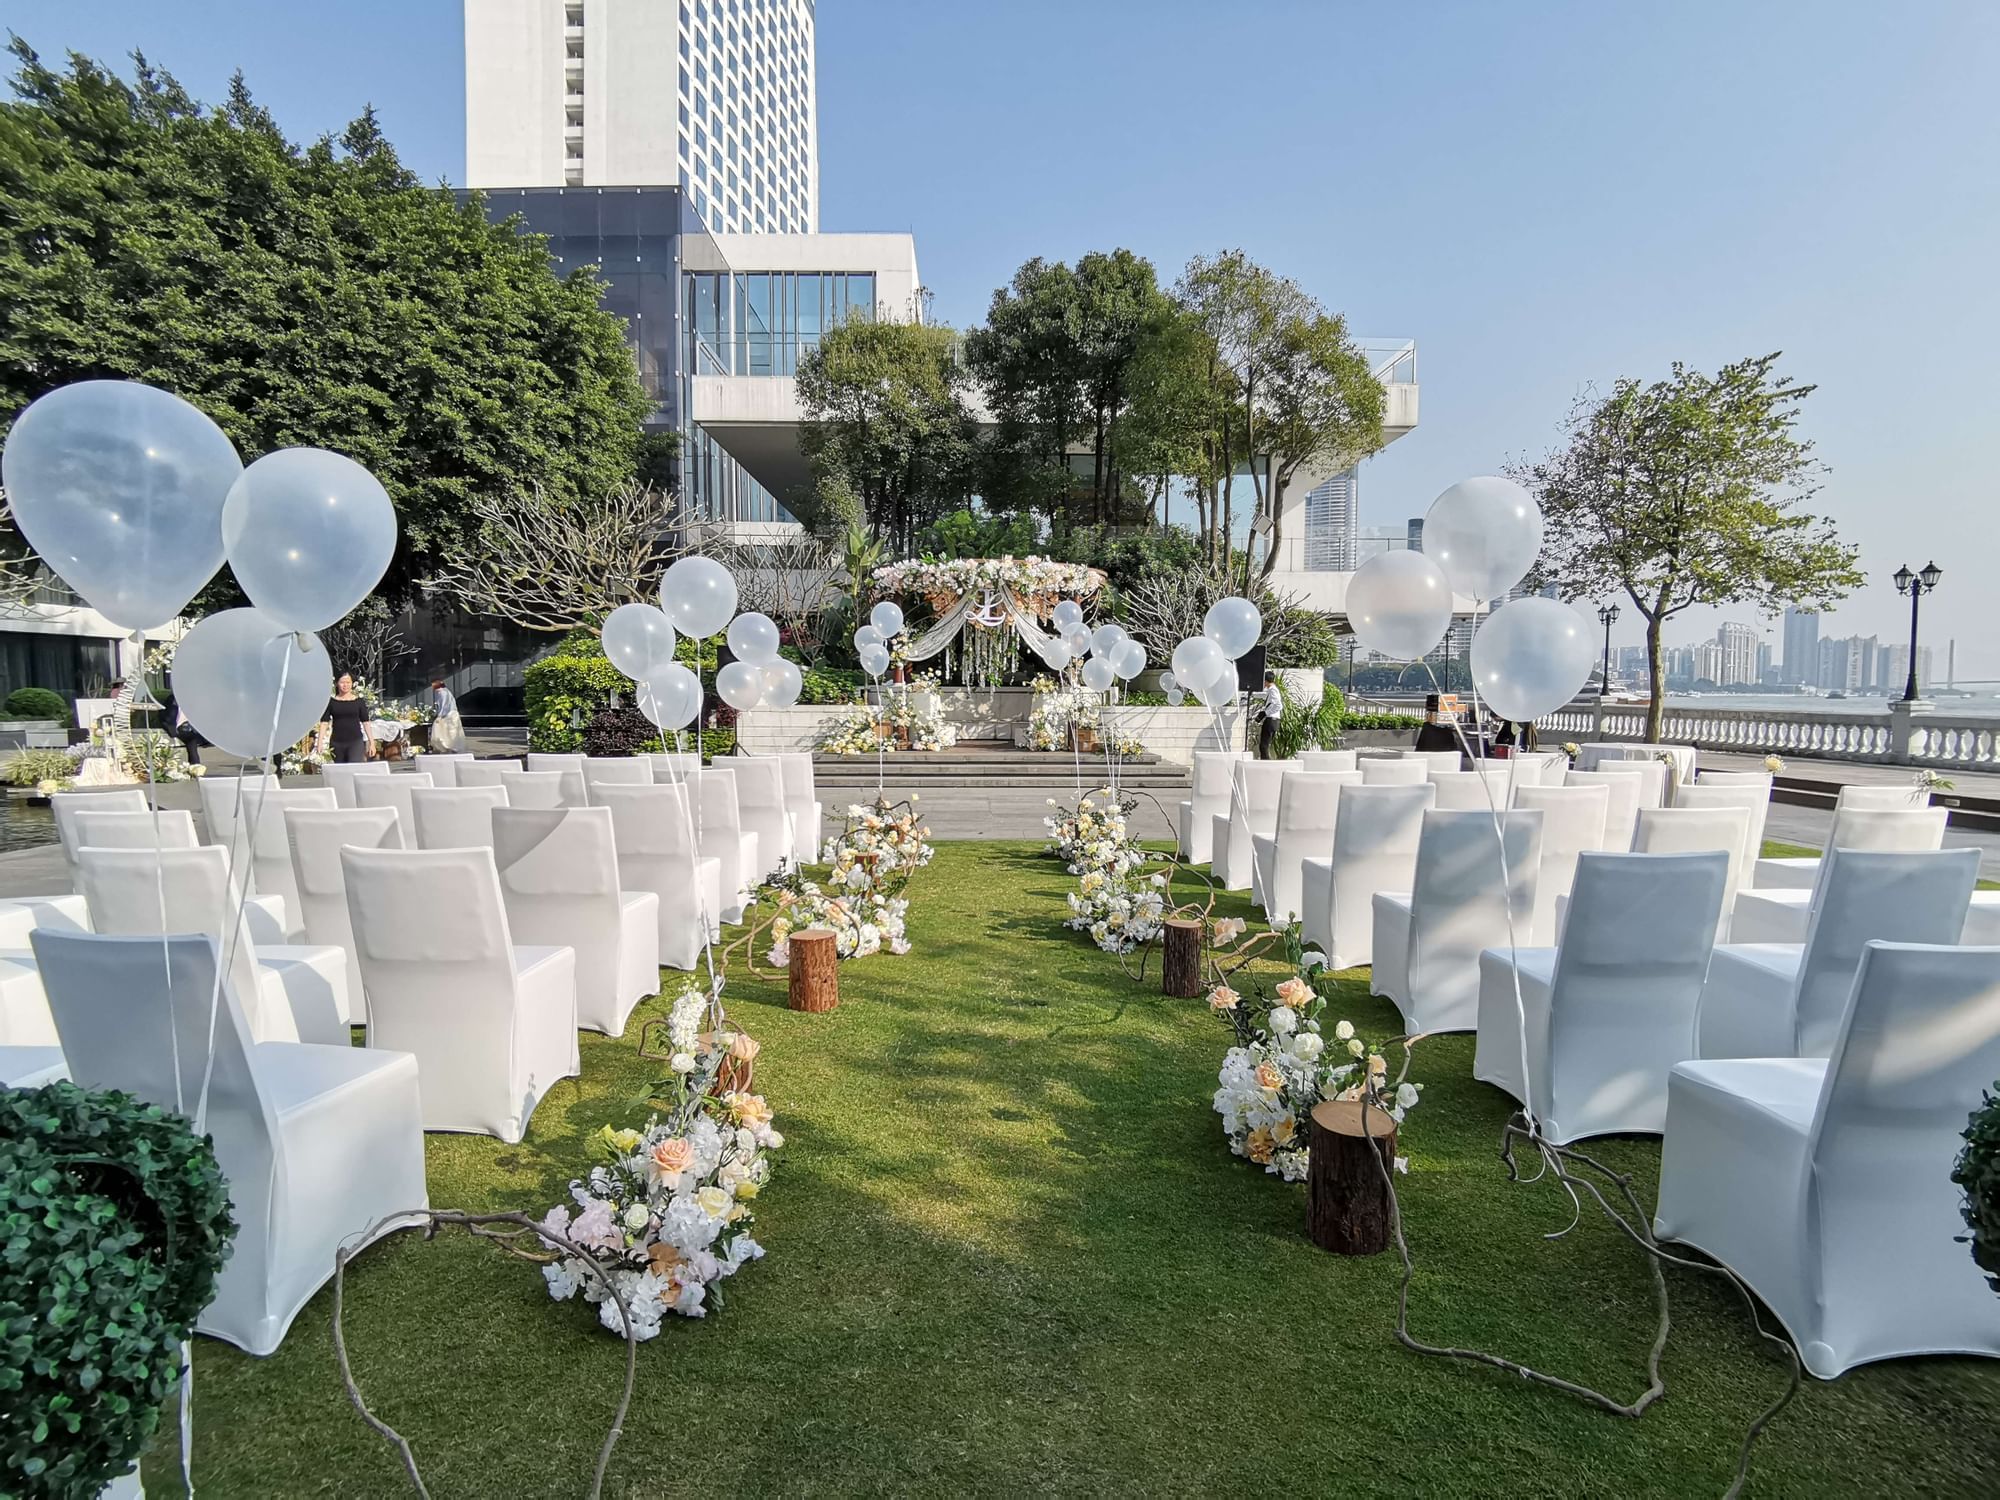 An outdoor Wedding Ceremony arranged at White Swan Hotel